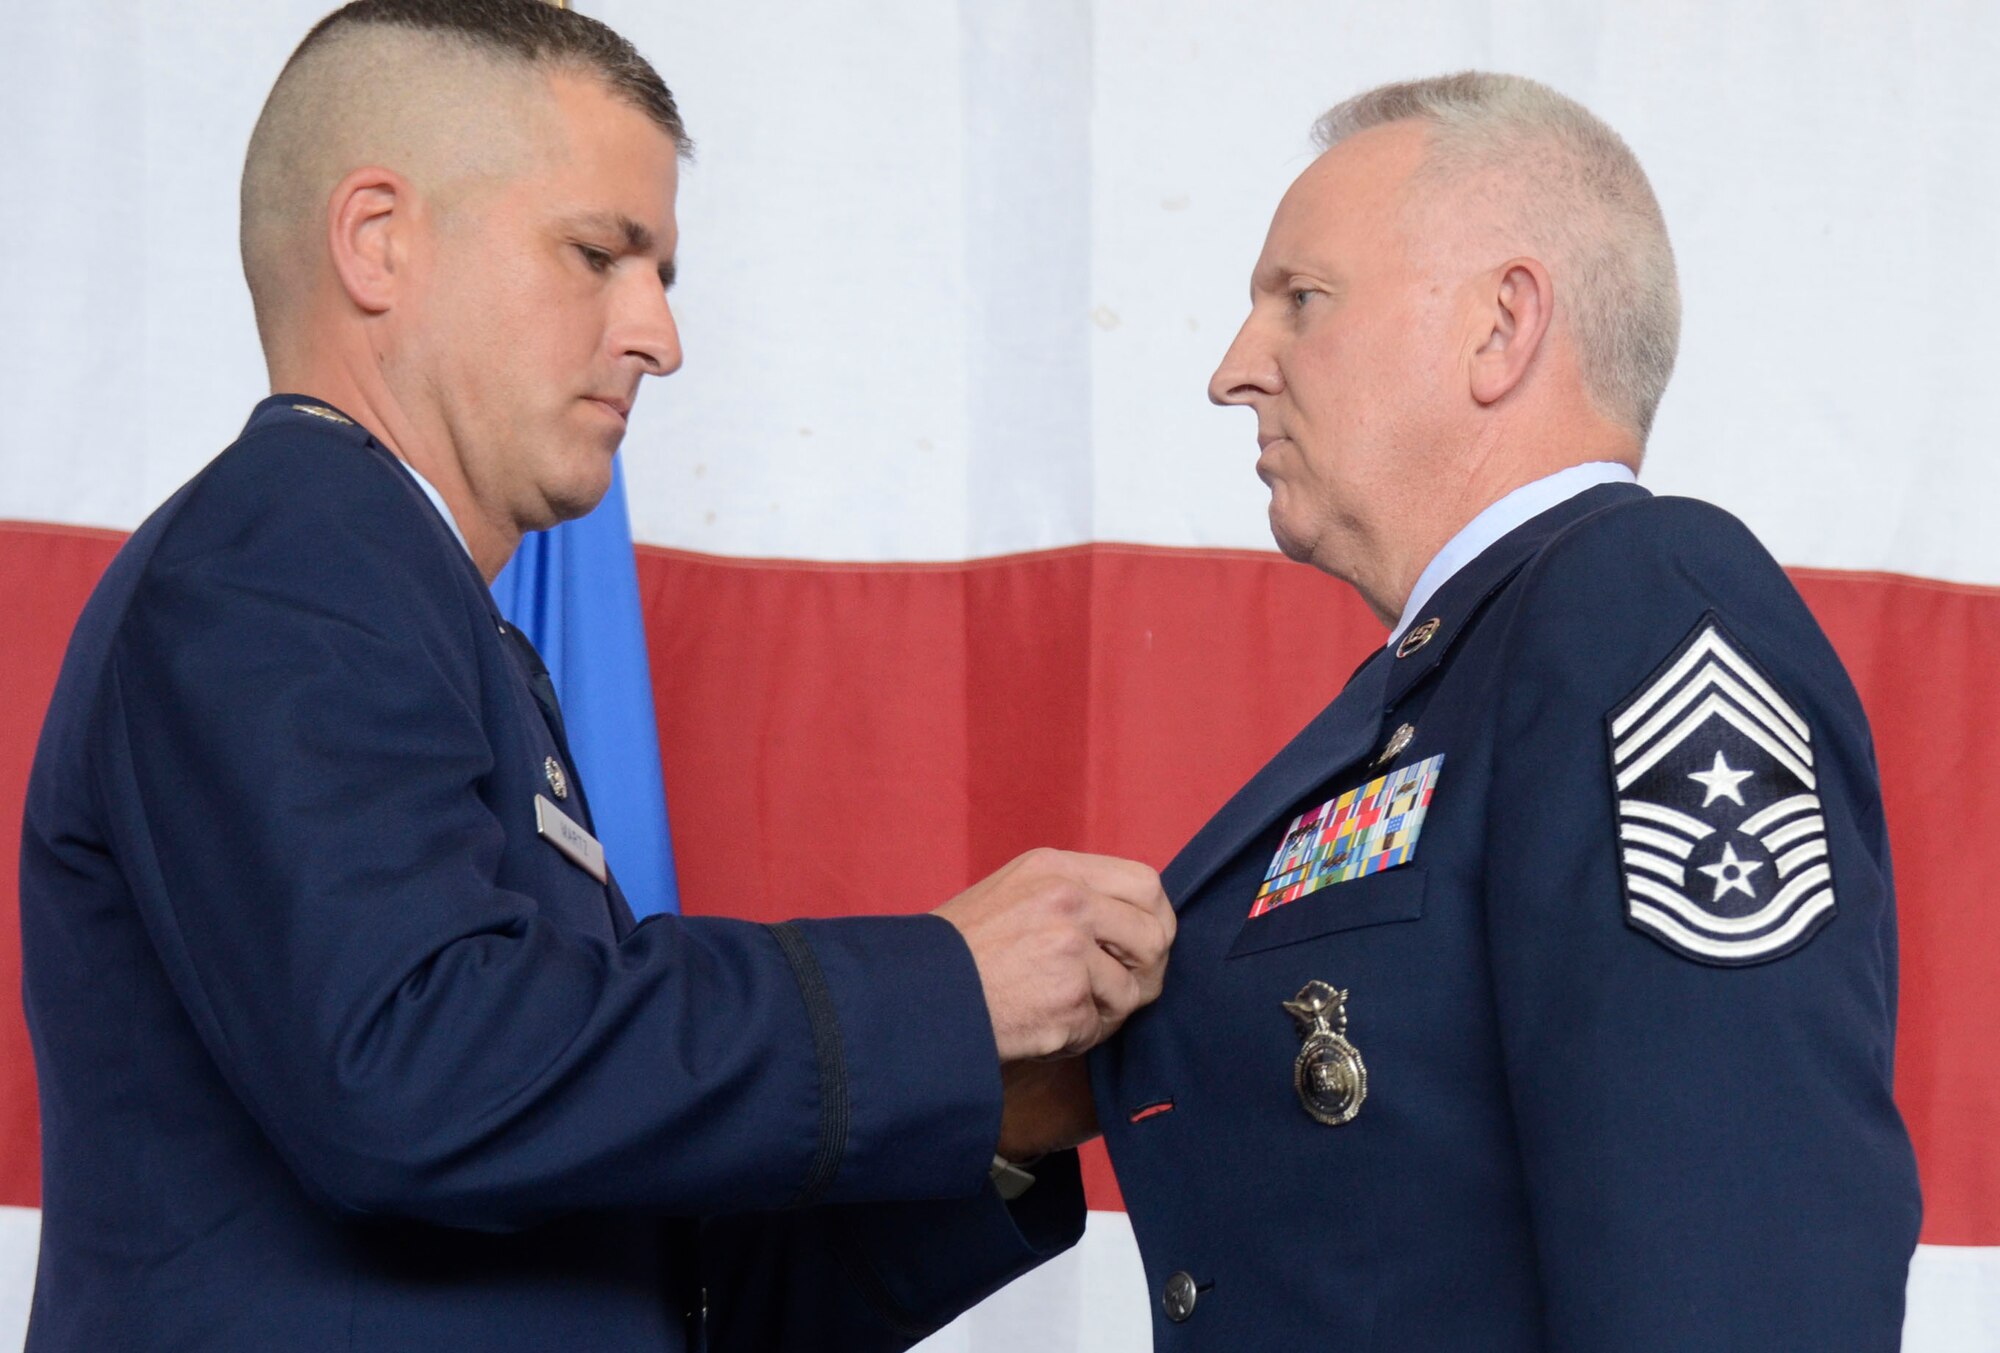 Col. Timothy Martz, 94th Security Forces commander, retires police badge number 010749 from Chief Master Sgt. Wendell Peacock, 94th Airlift Wing command chief, and the U.S. Air Force during his retirement ceremony at Dobbins Air Reserve Base, Aug. 2014. Peacock served as a security forces member for 30 years. (U.S. Air Force photo/Don Peek)